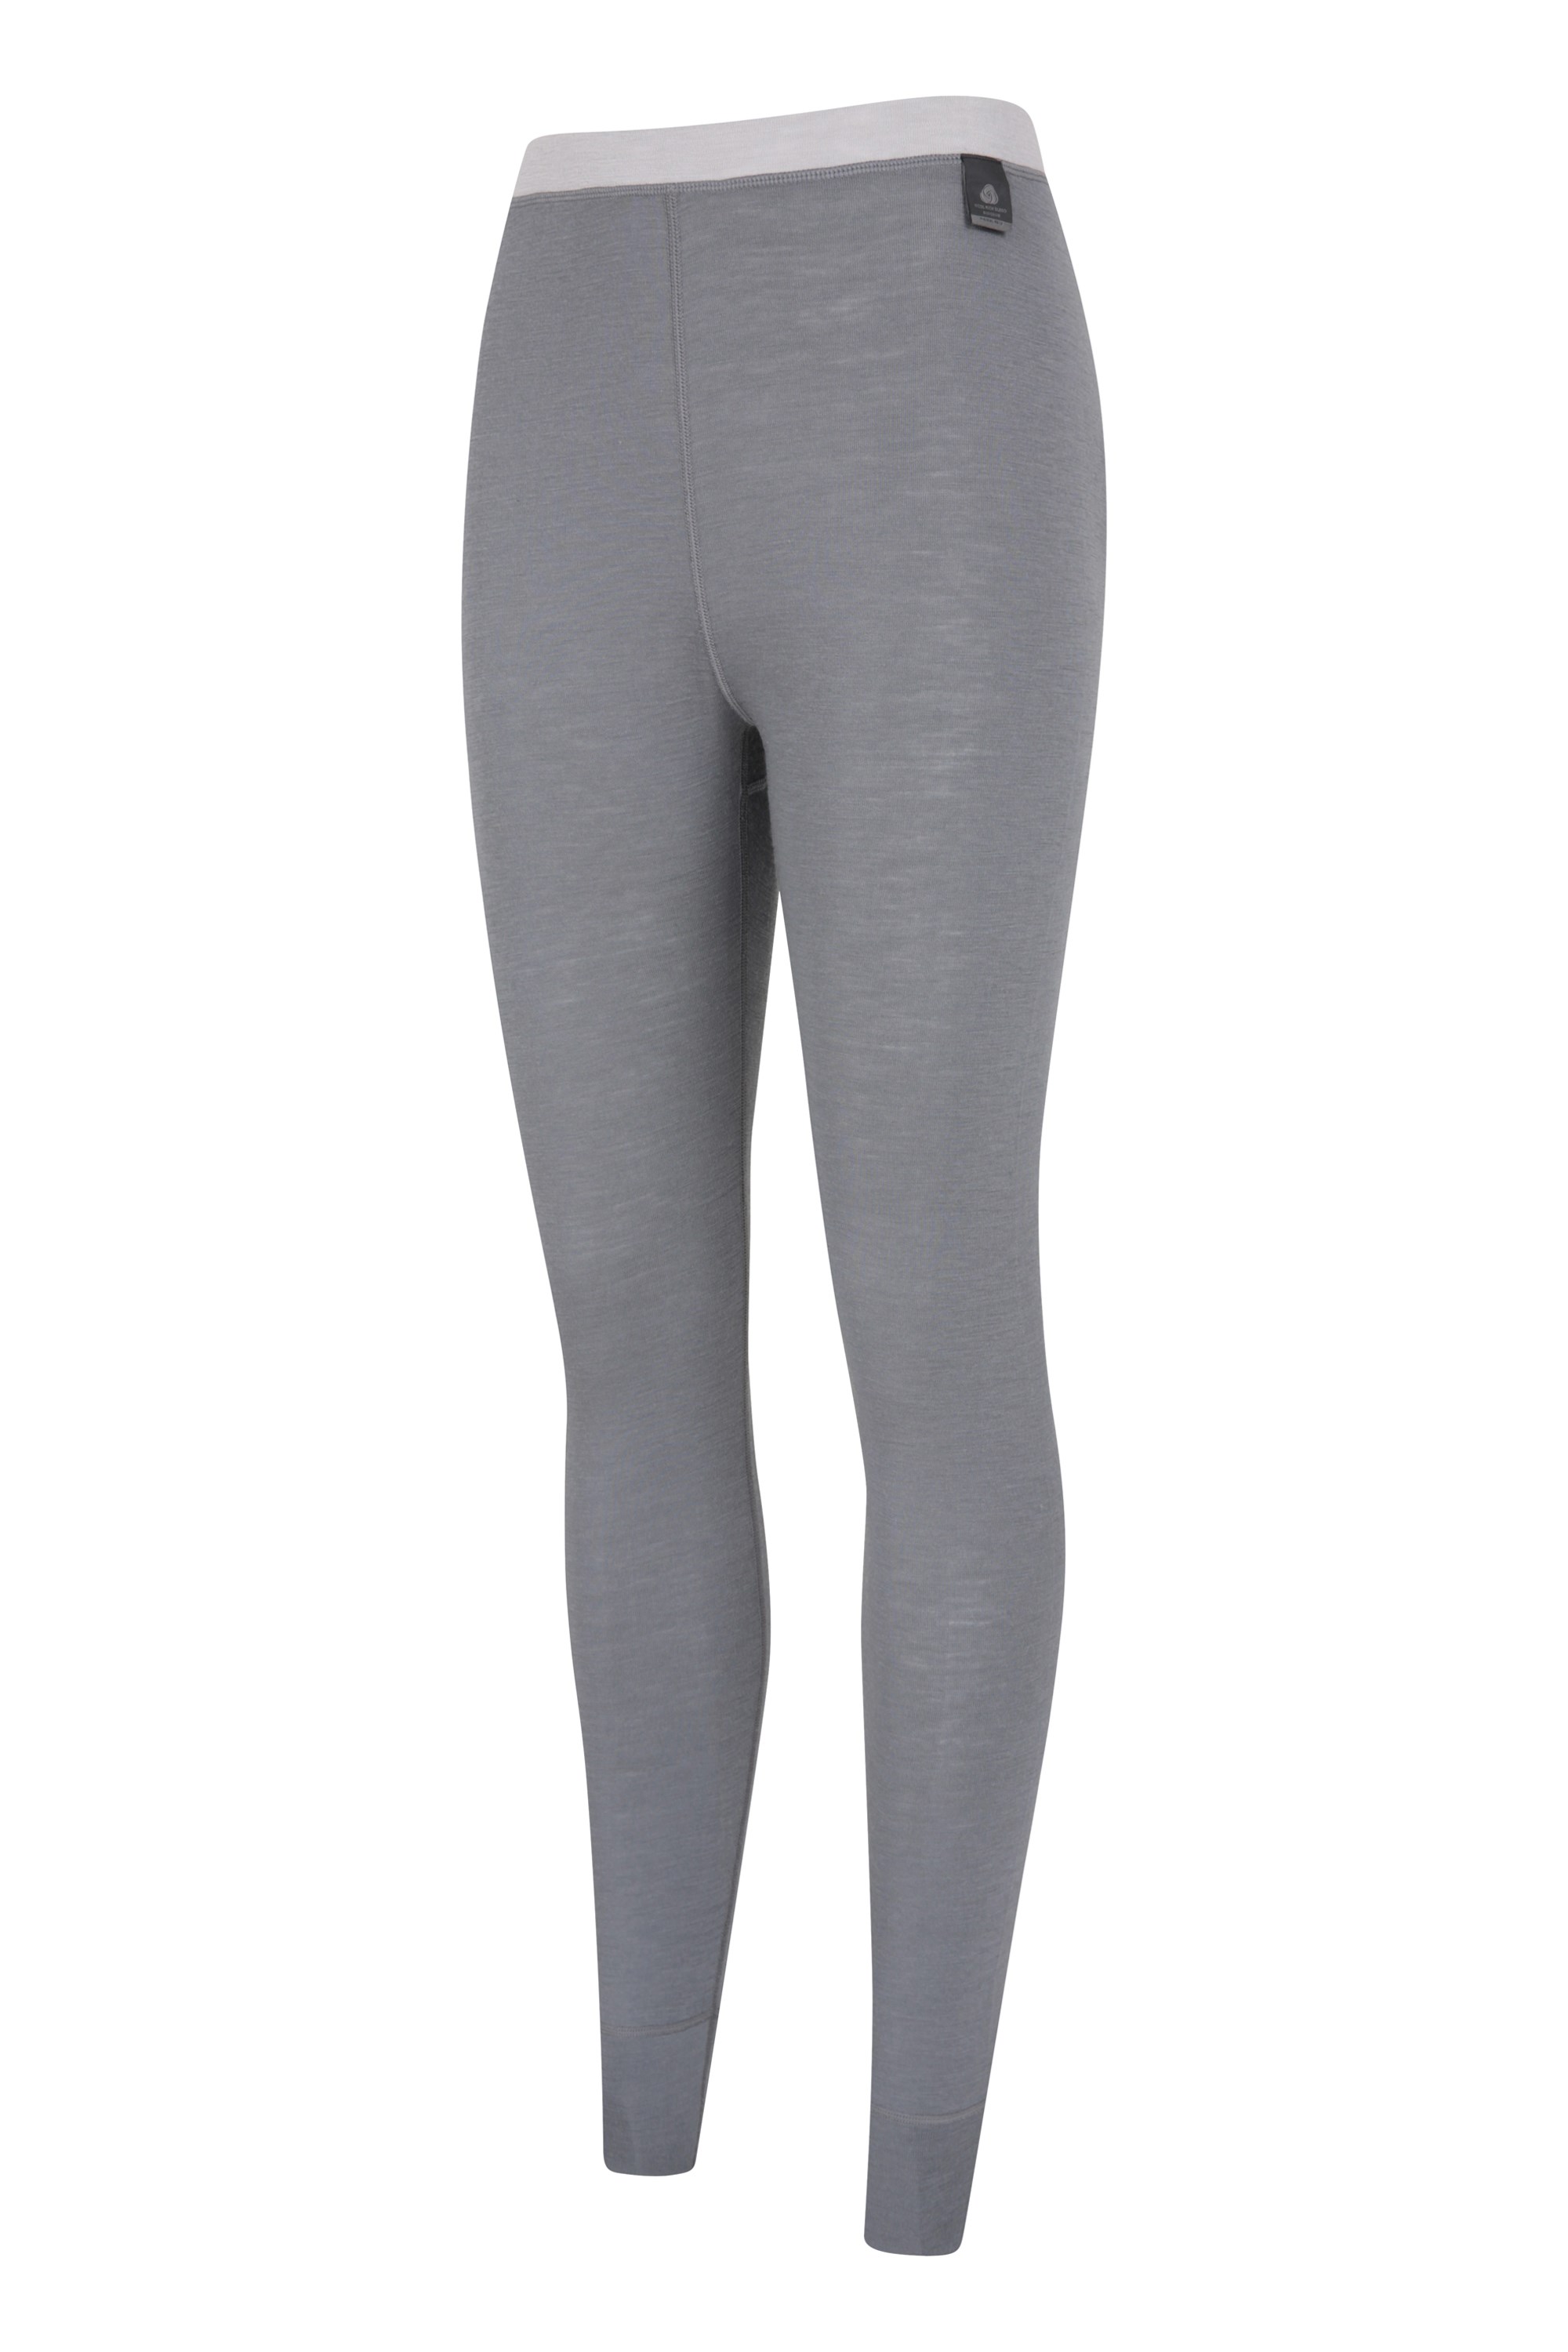 Buy Mountain Warehouse Blue Merino Thermal Pants Multipack from Next  Luxembourg